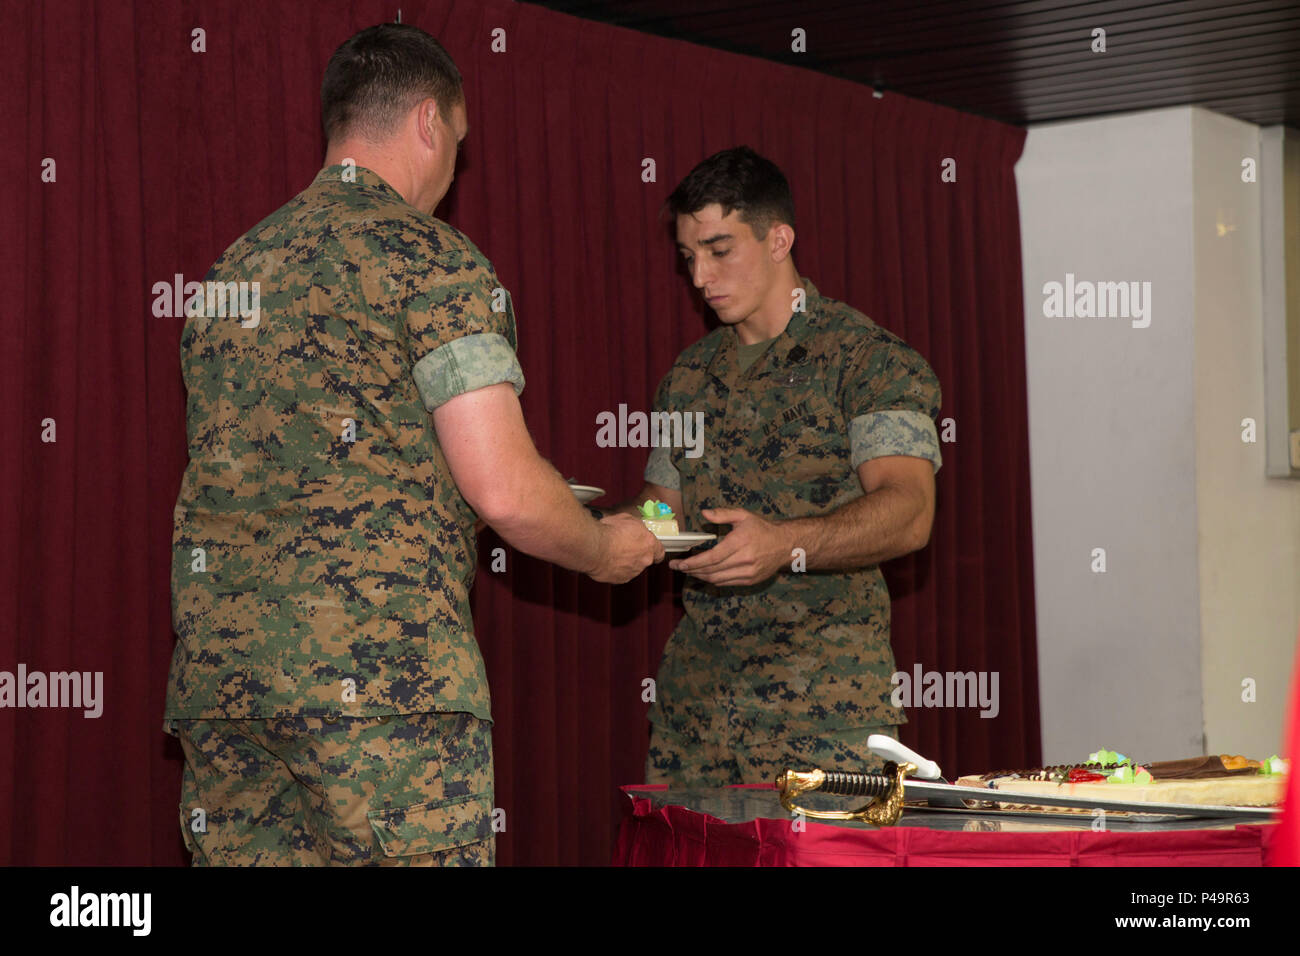 senior chief hospital corpsman mitchell woods left the oldest corpsman present passes a piece of cake to hospital corpsman nicholas vath right the youngest corpsman present during the 118th navy hospital corpsman birthday ceremony aboard morn air base spain june 17 2016 it is traditional for a piece of cake to be passed from the oldest corpsman present to the youngest symbolizing the passage of knowledge and experience from one generation to the next us marine corps photo by staff sgt tia naglereleased P49R63